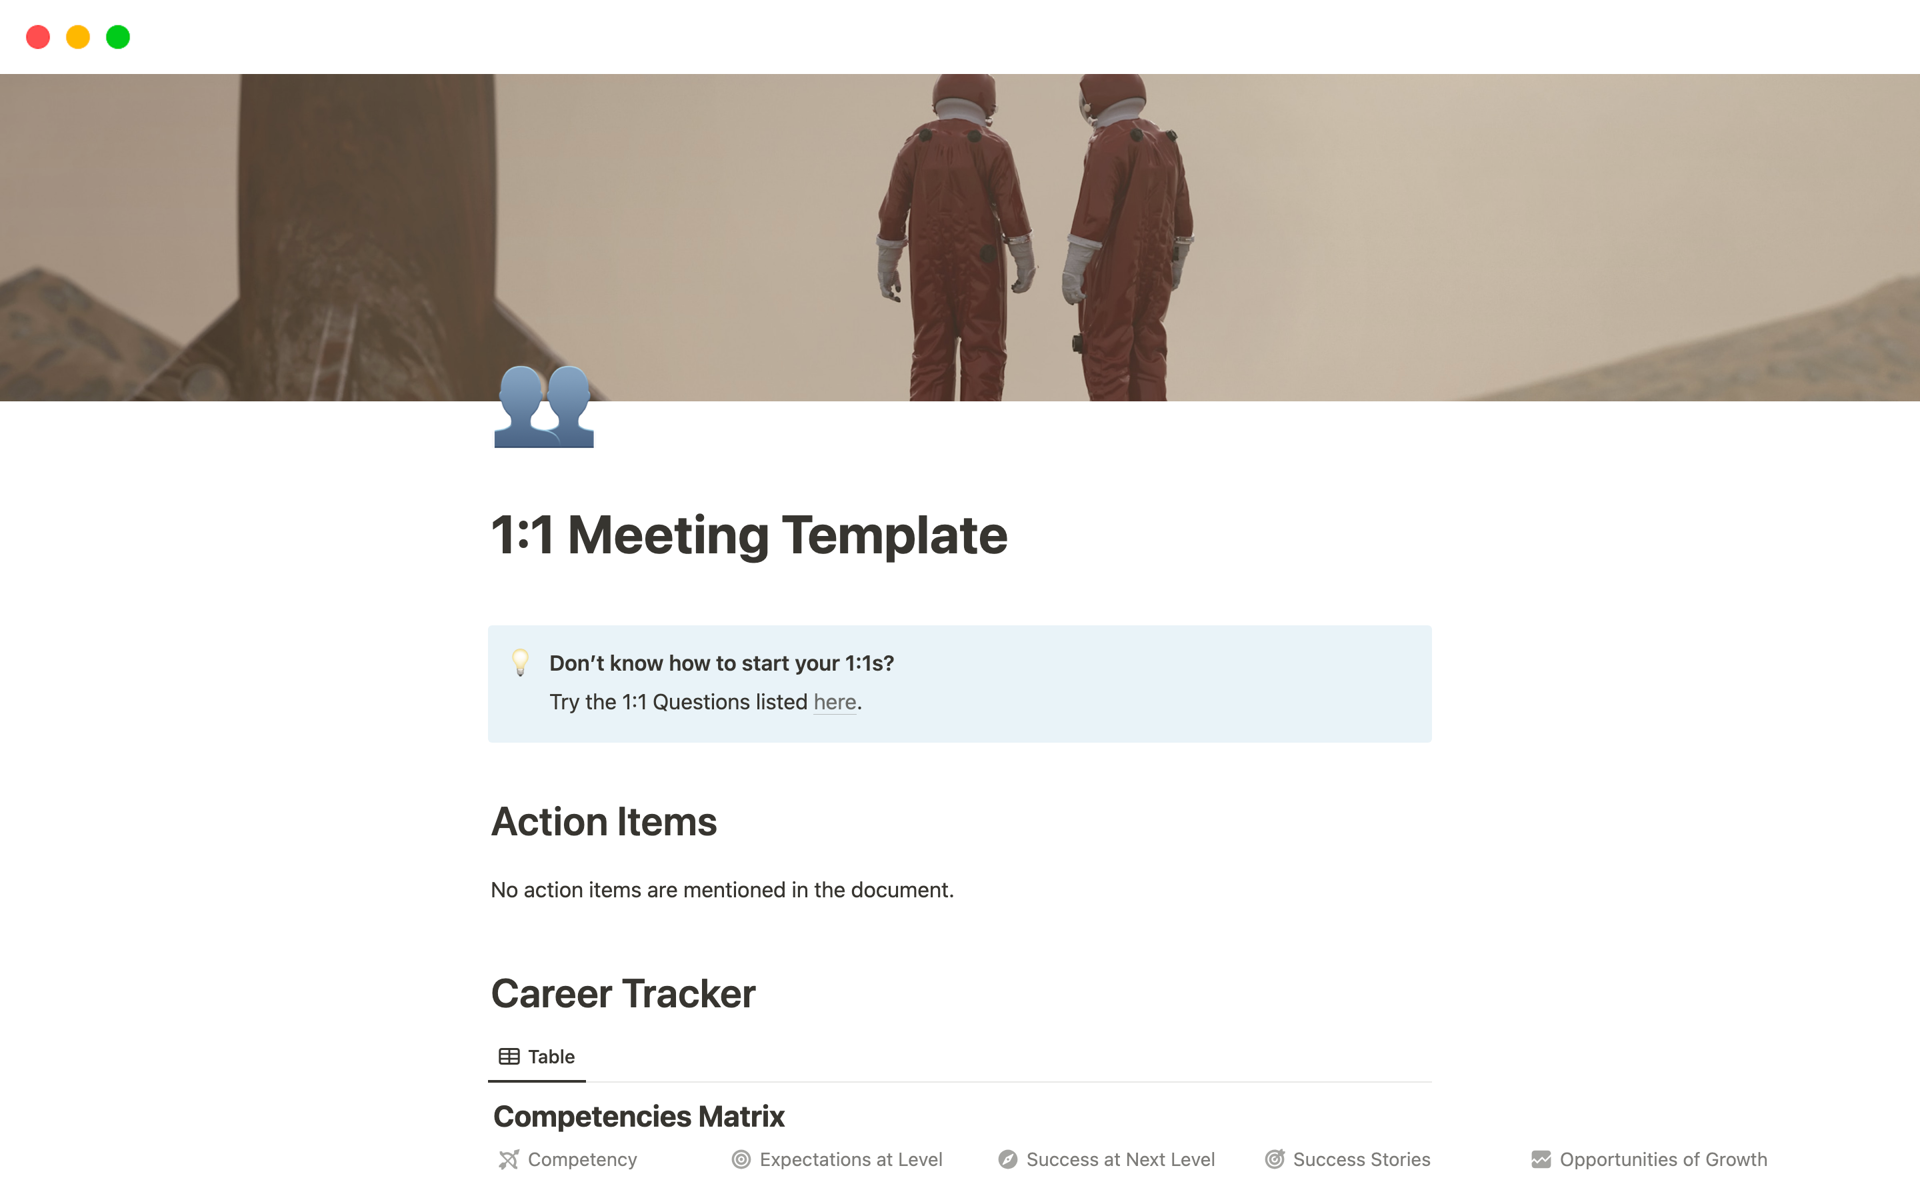 A full template for tracking 1:1 conversations with your teams